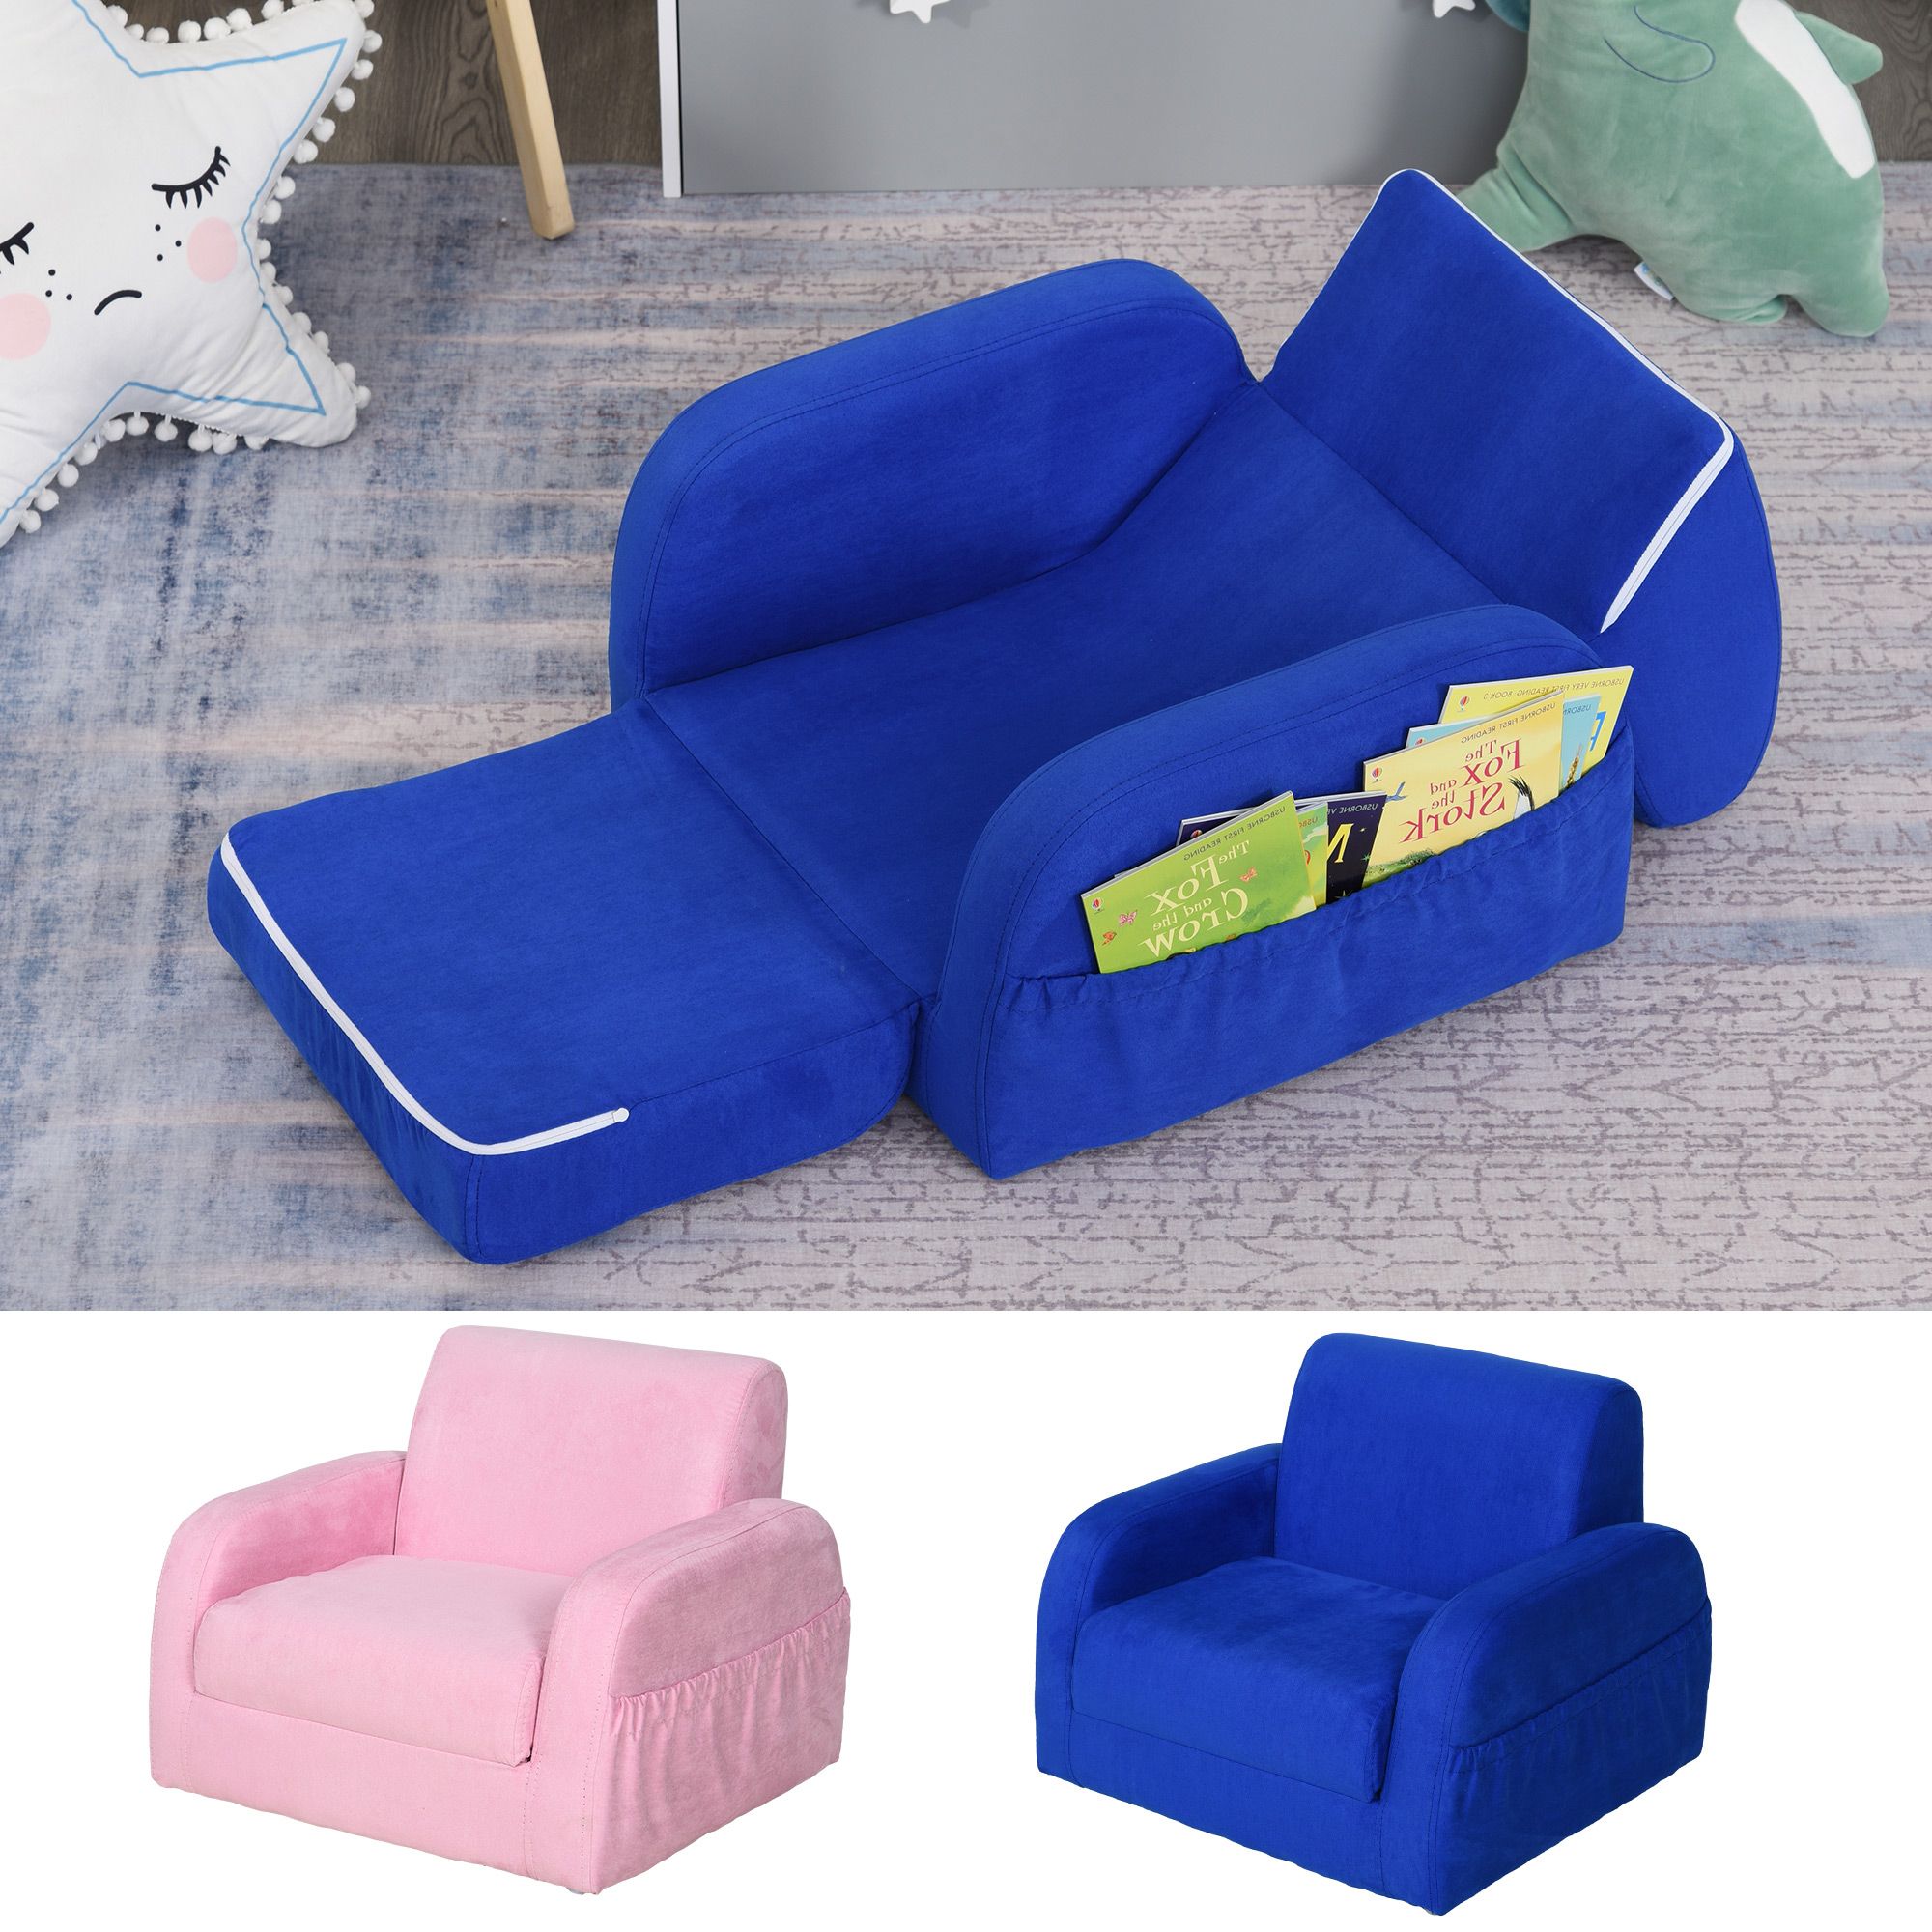 Newest Children's Sofa Beds Regarding 2 In 1 Kids Sofa Armchair Chair Fold Out Flip Open Baby Bed Couch (View 2 of 15)